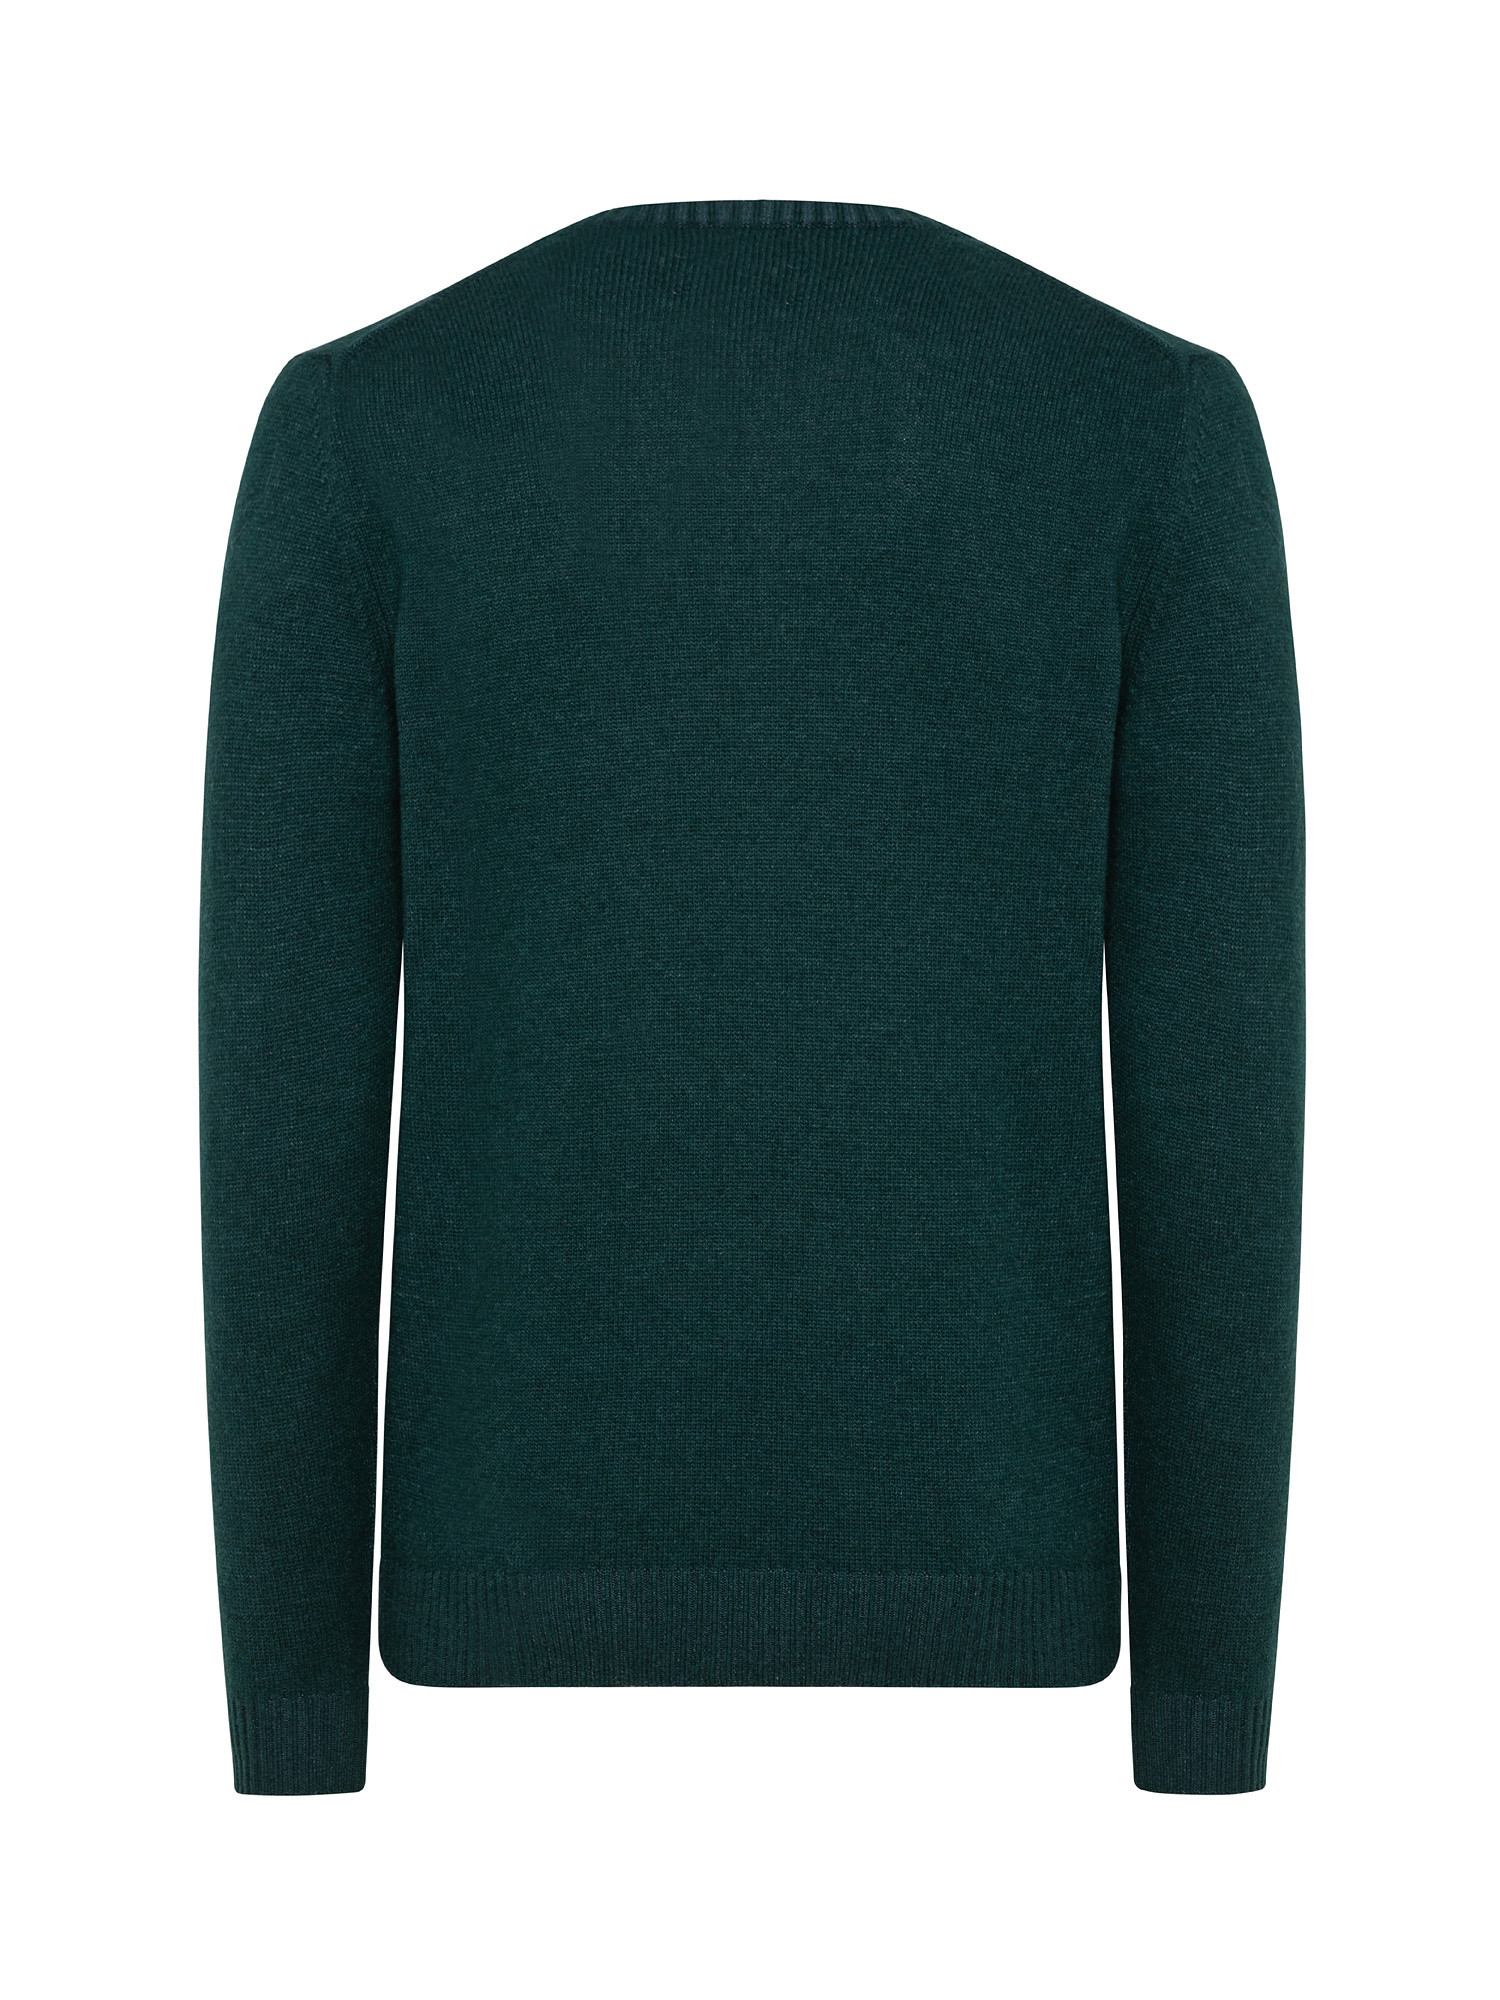 Pullover girocollo, Verde, large image number 1